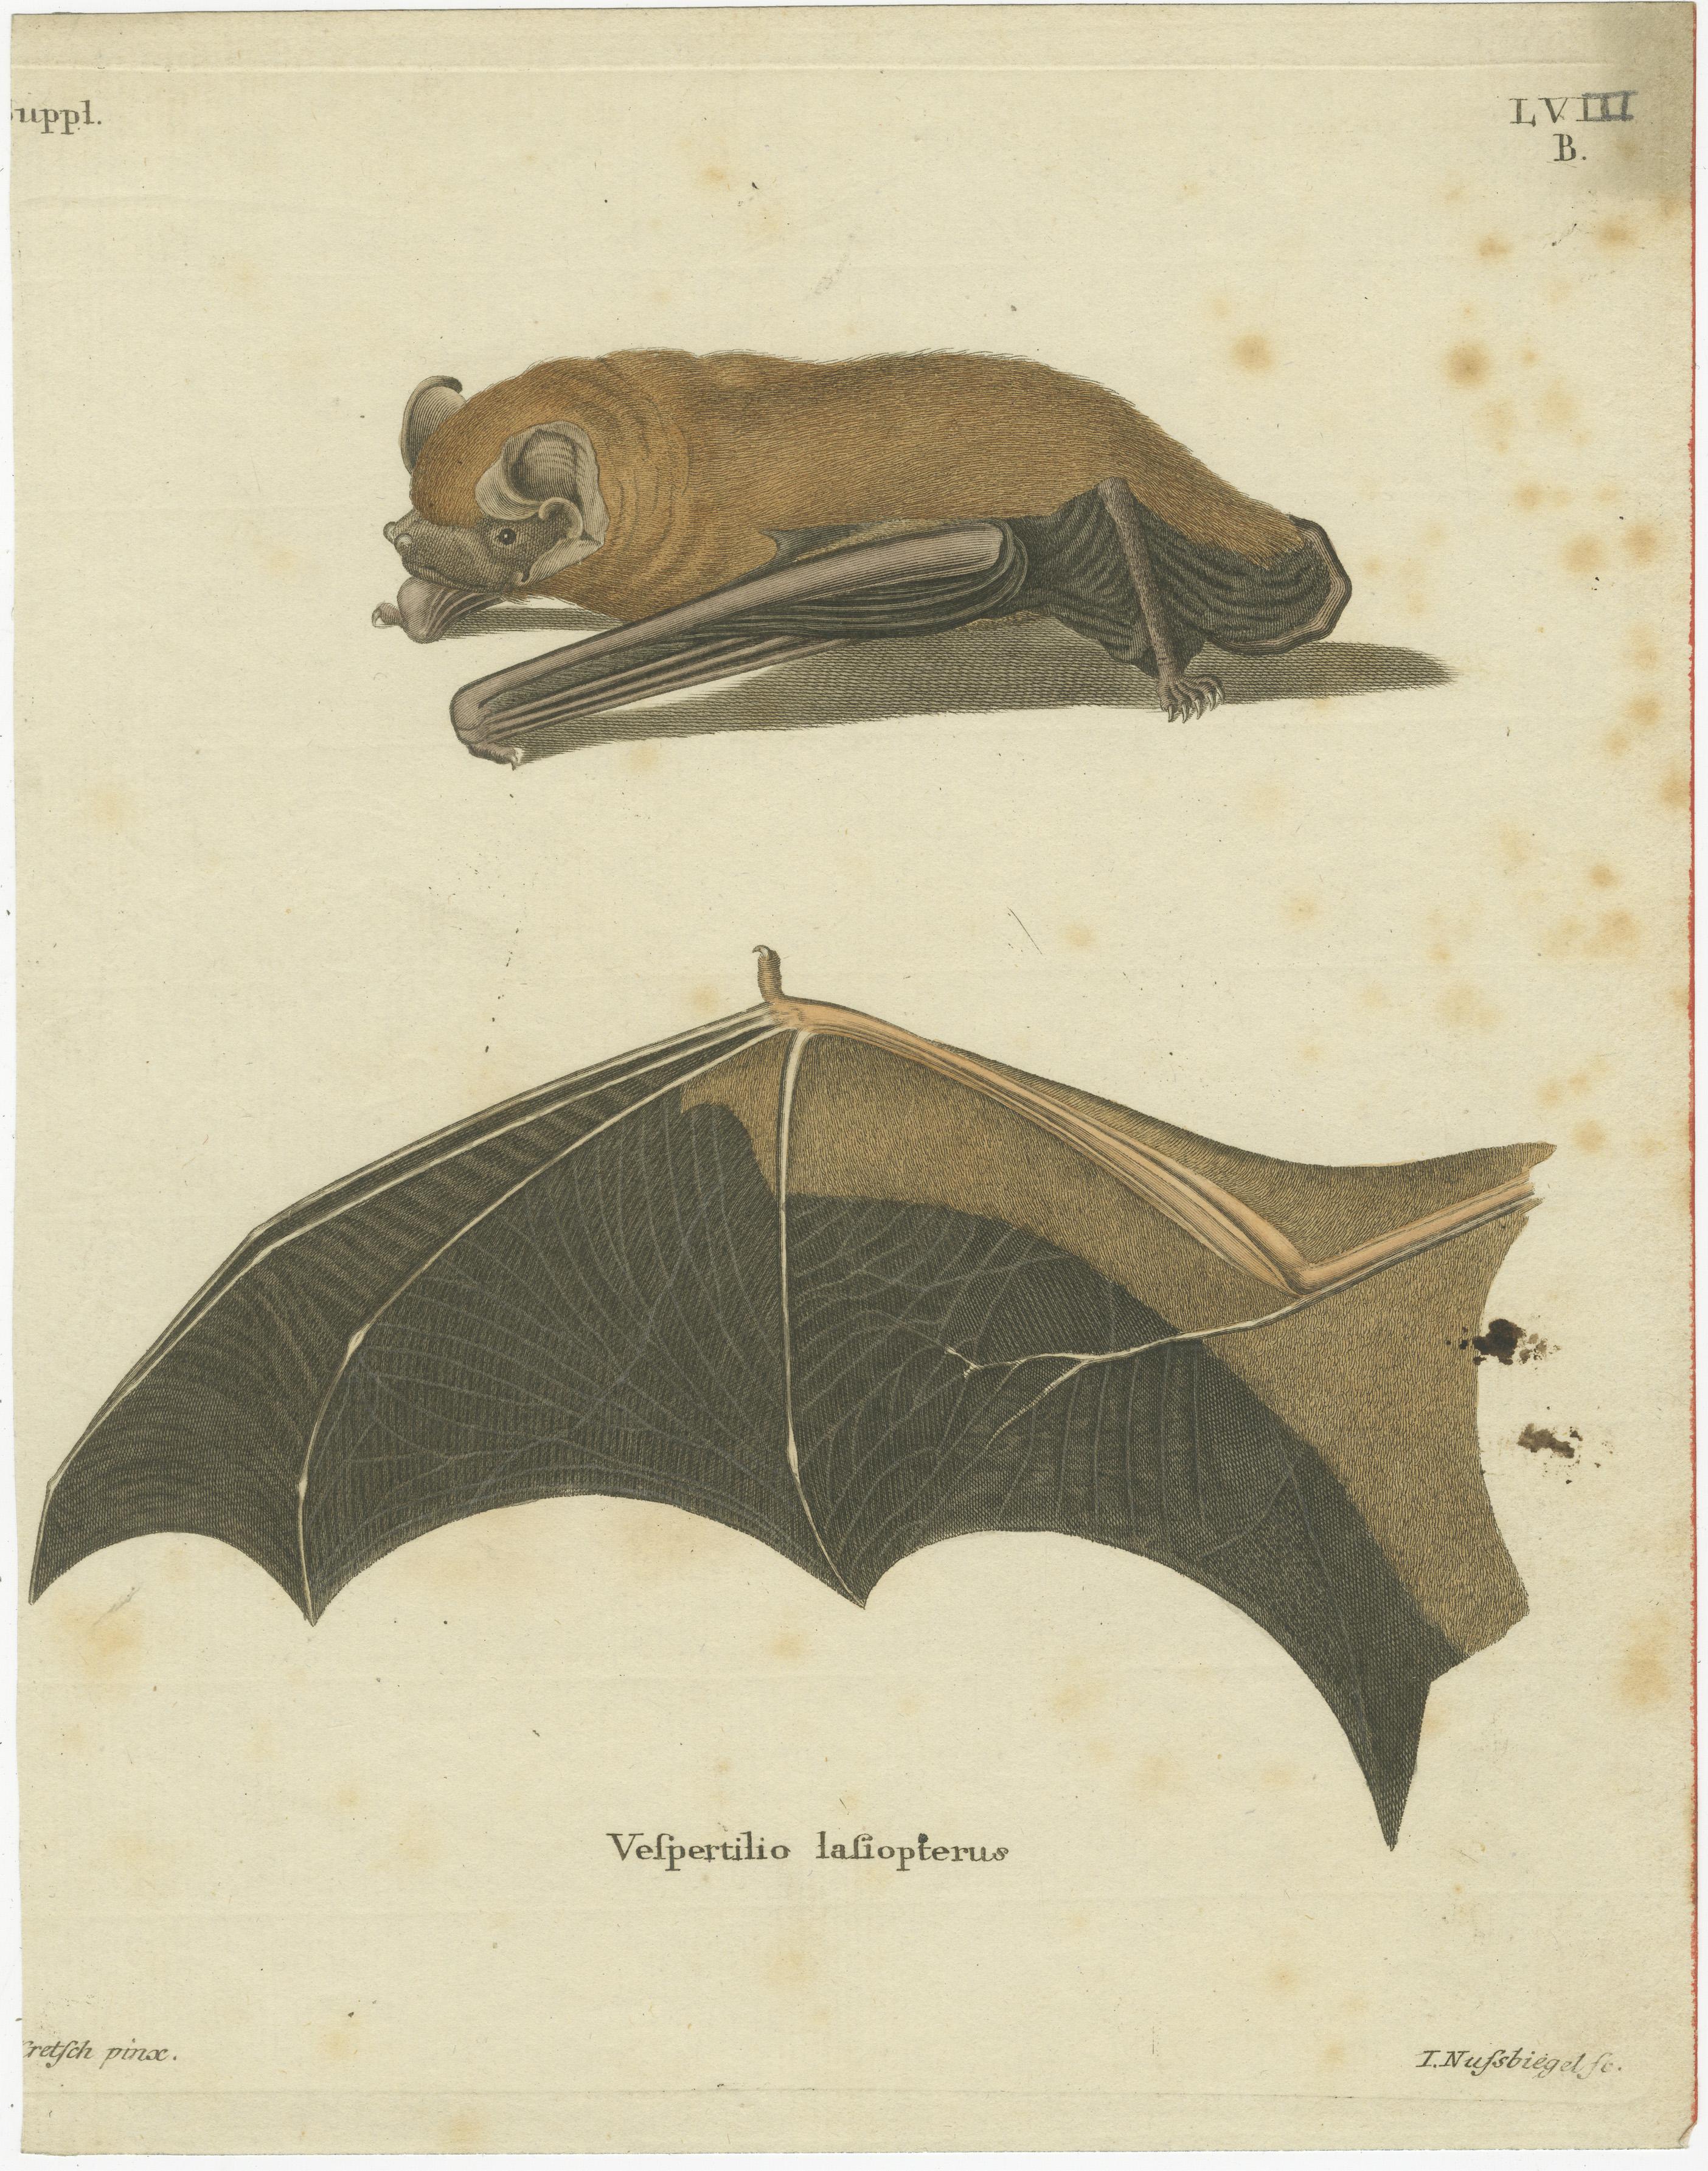 The prints depict two different bat species, both intricately illustrated with a level of detail that suggests they come from Johann Christian Daniel von Schreber's 